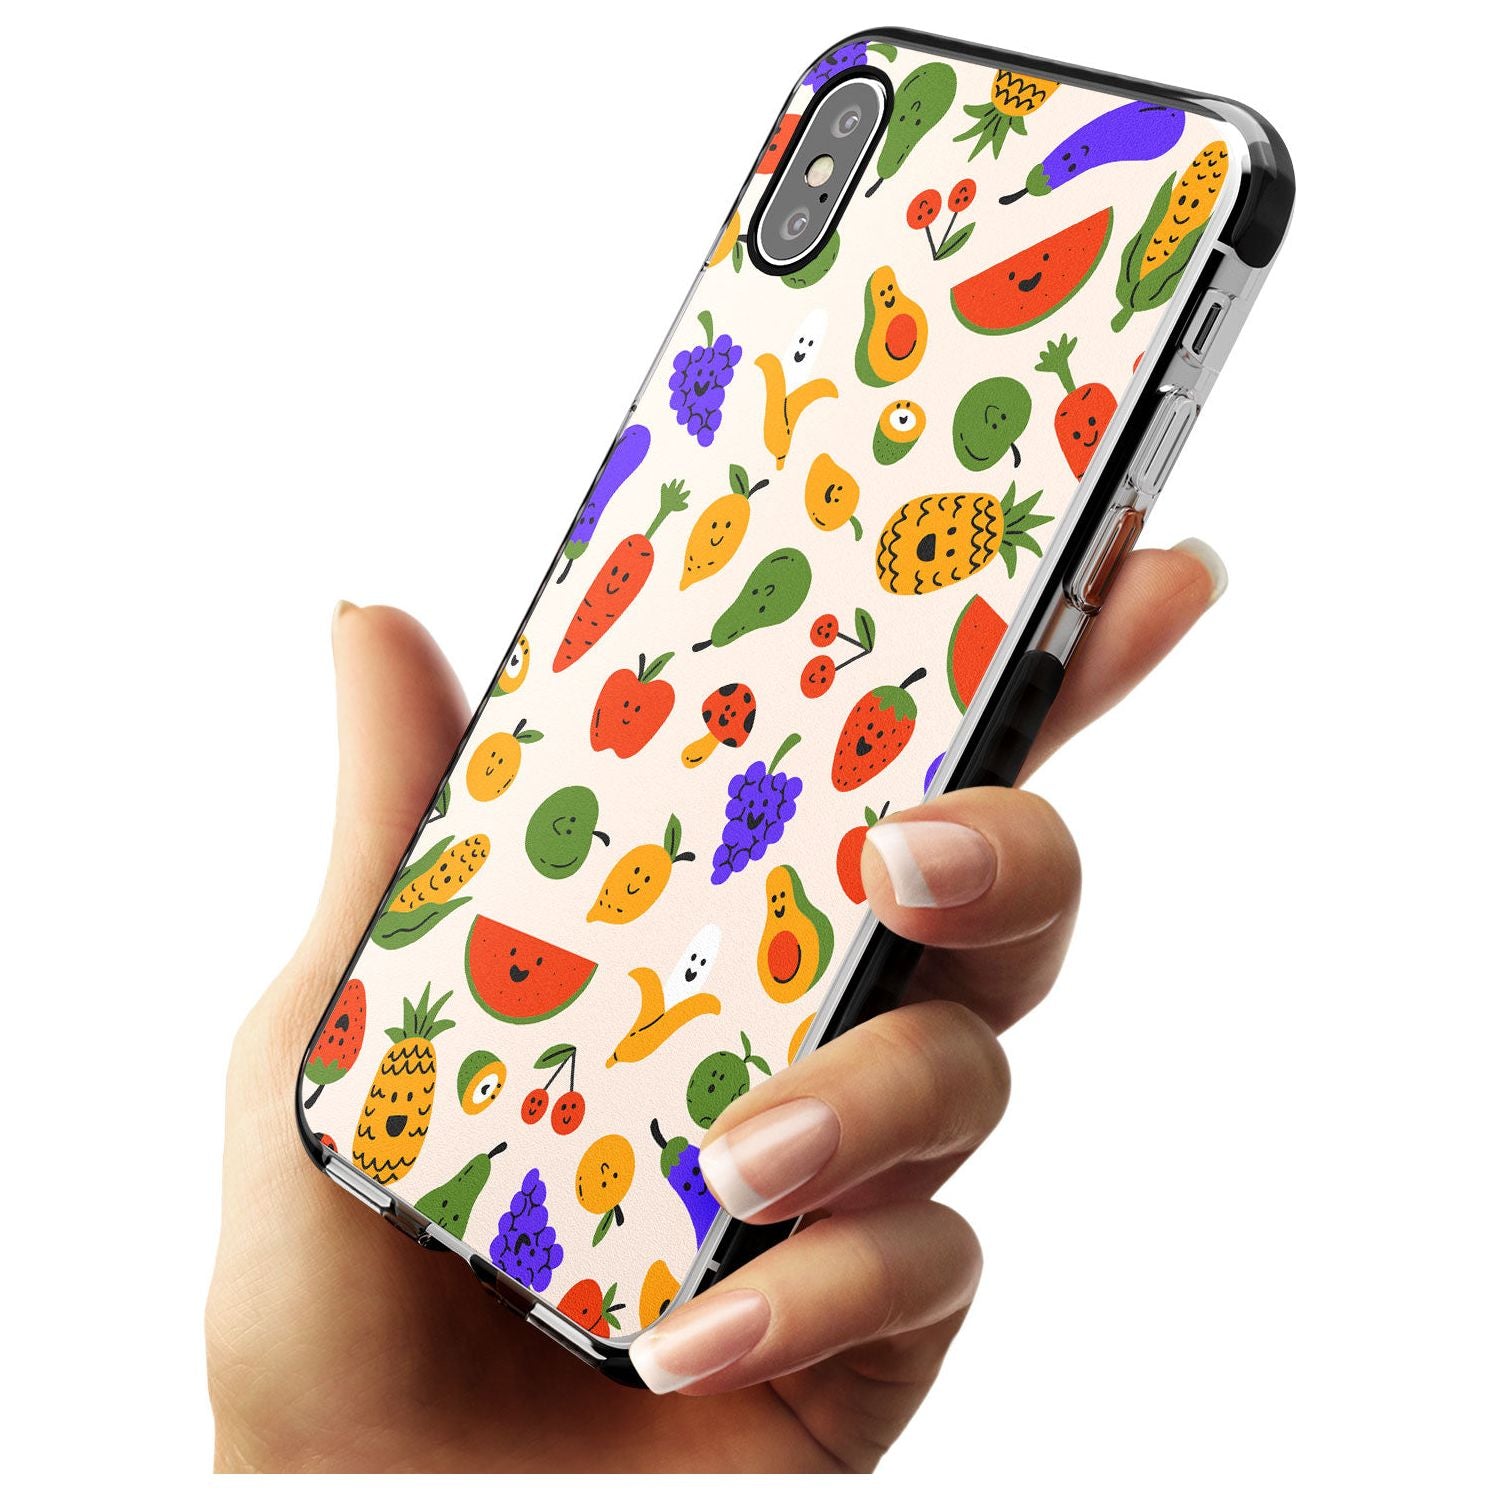 Mixed Kawaii Food Icons - Solid iPhone Case Black Impact Phone Case Warehouse X XS Max XR